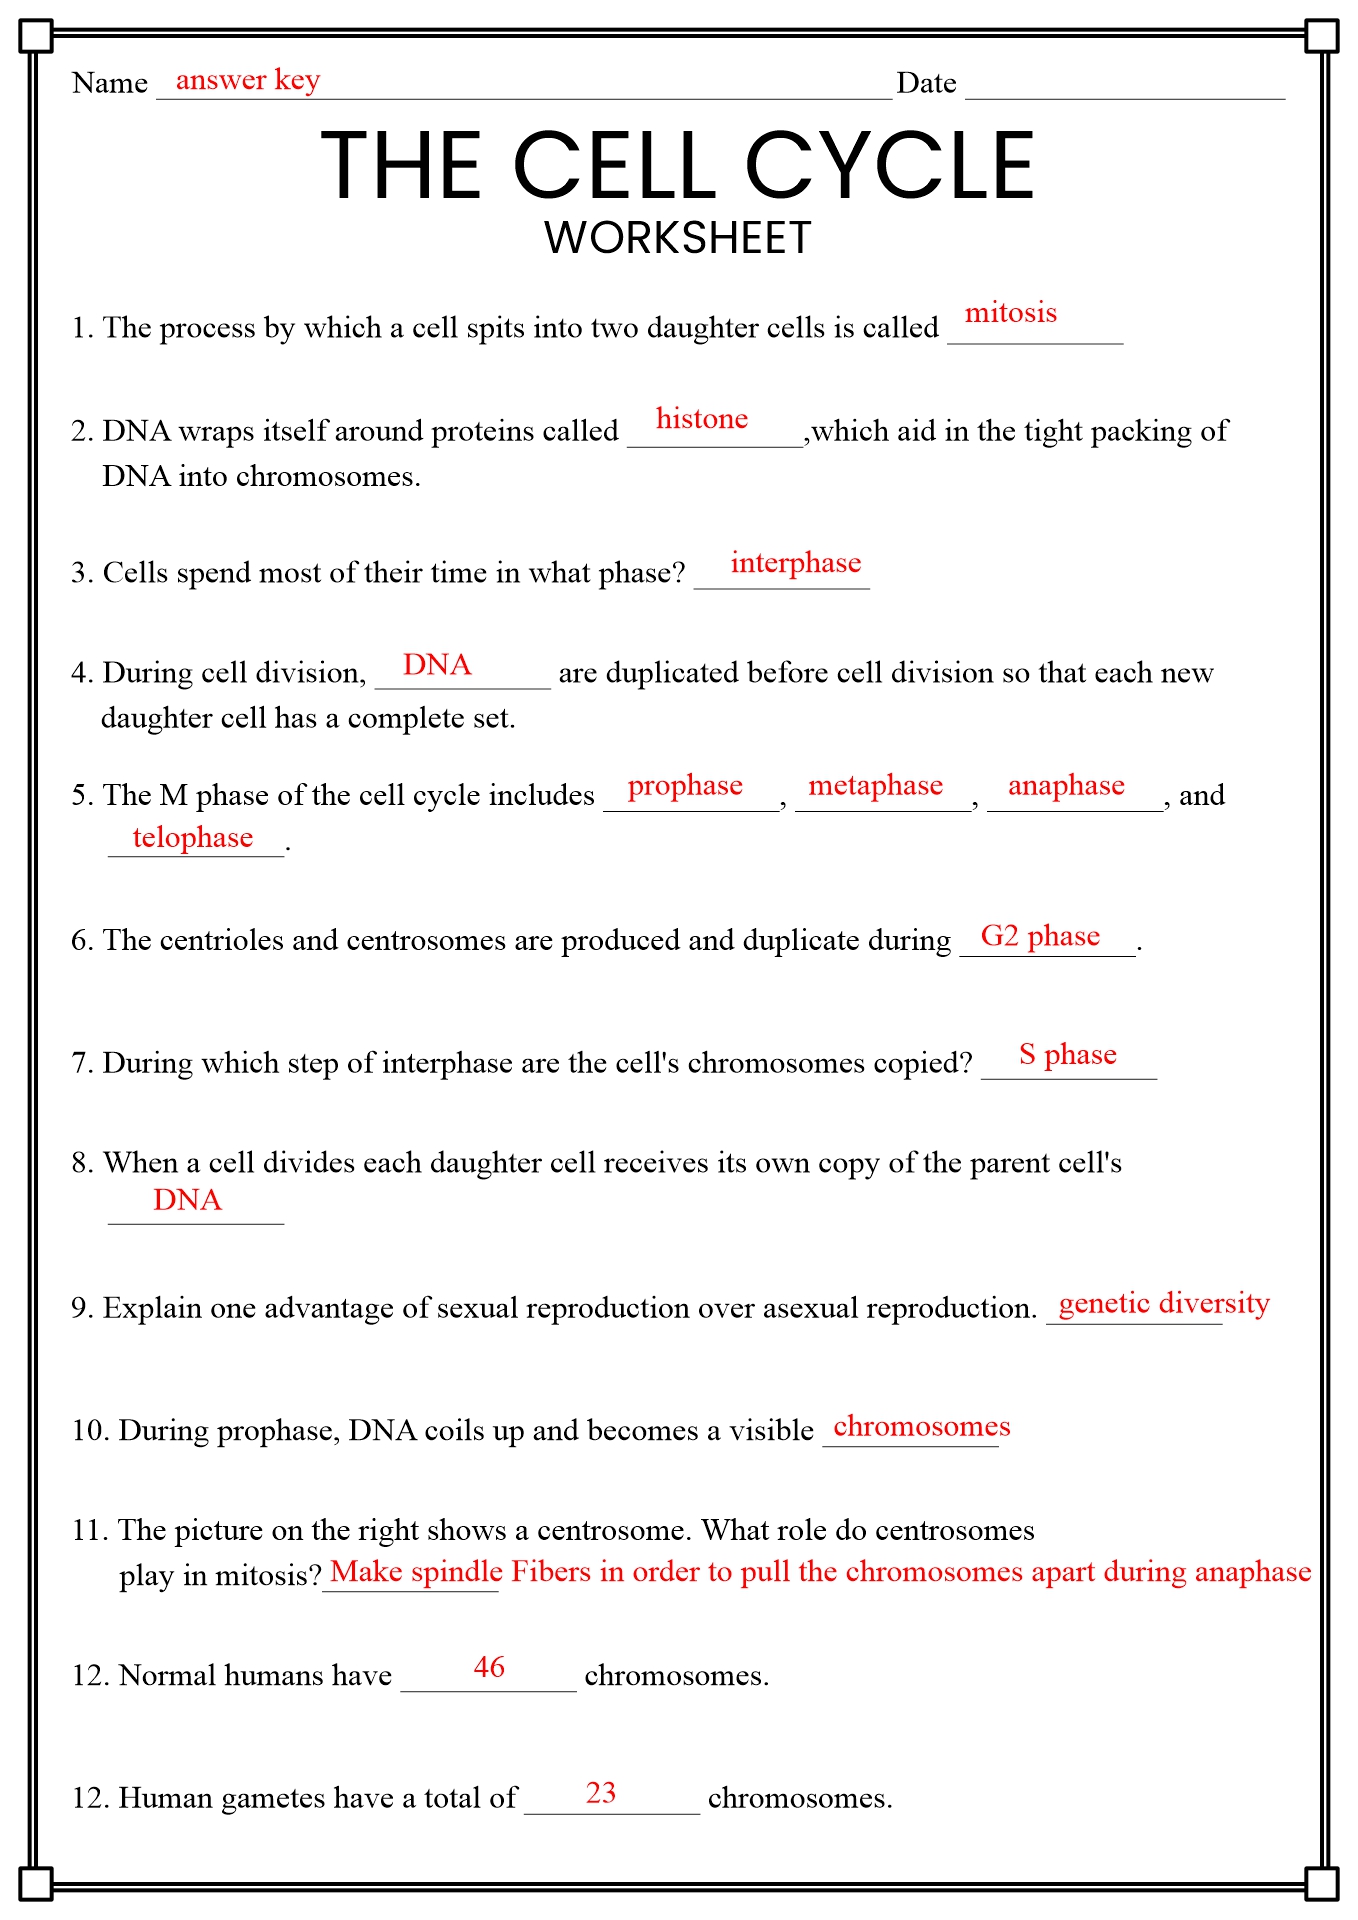 Cell Cycle and Mitosis Worksheet Answer Key